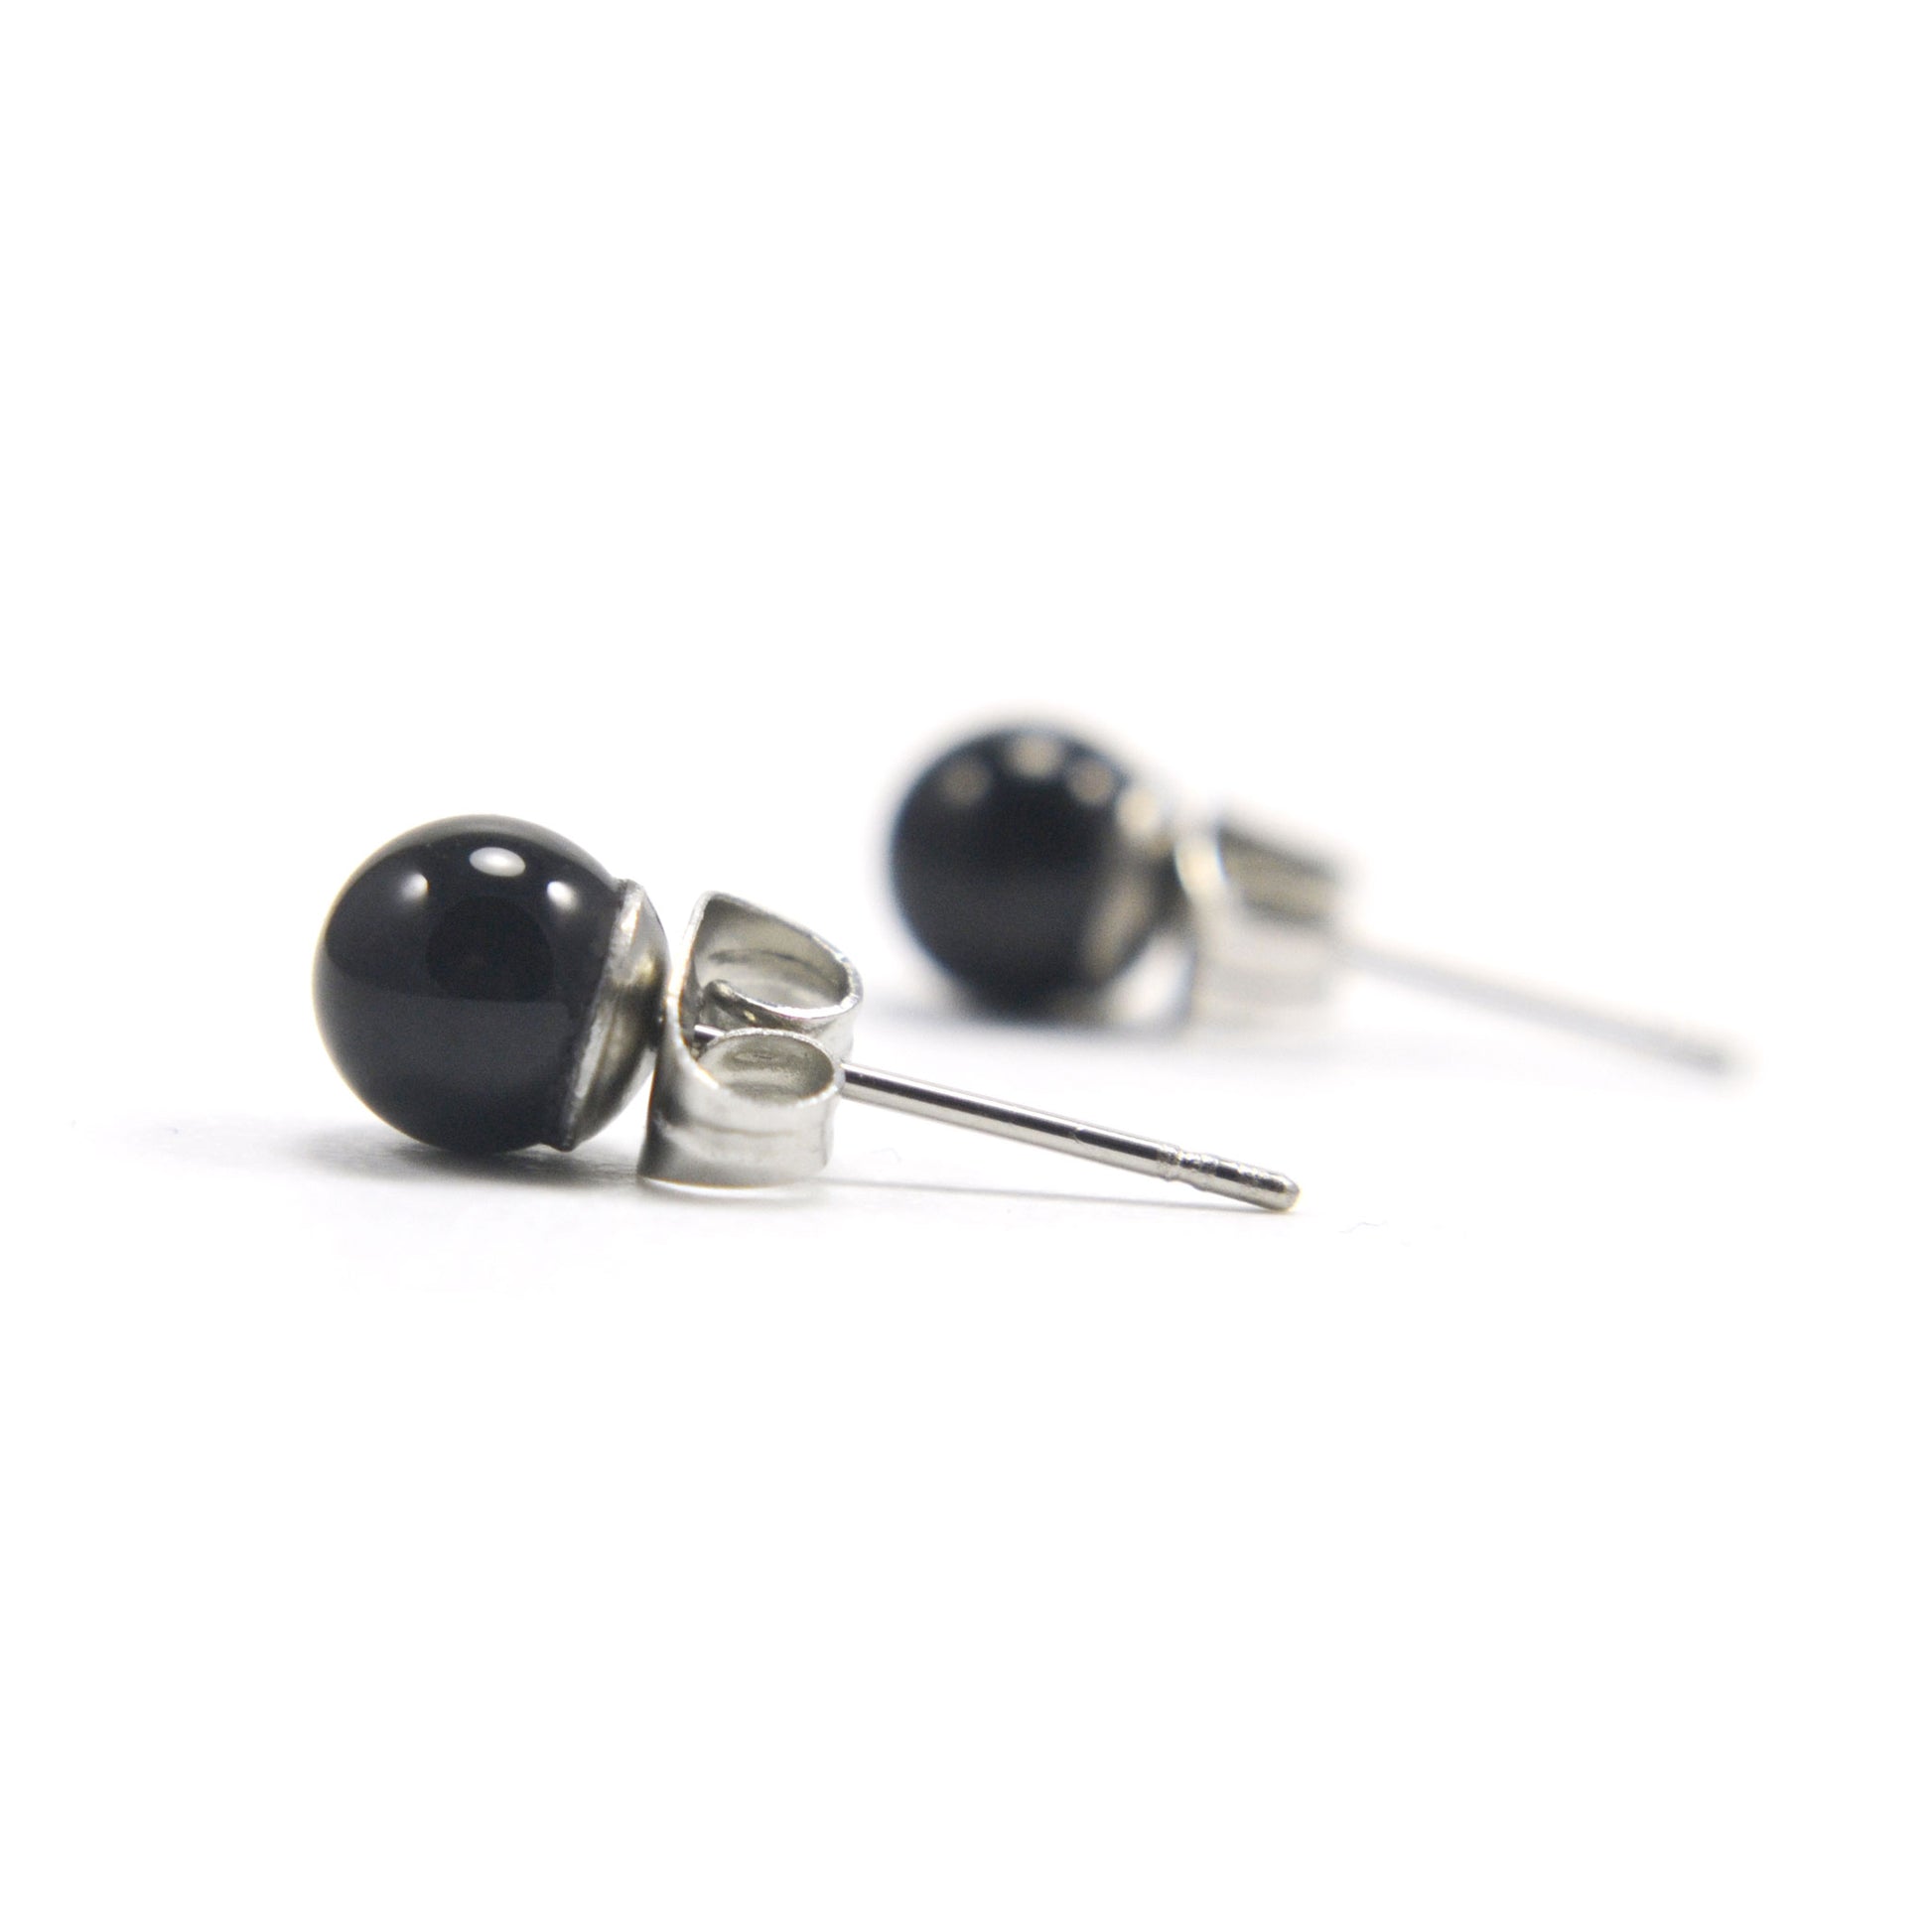 Side view of black Onyx earrings with hypoallergenic surgical steel stud posts and backs